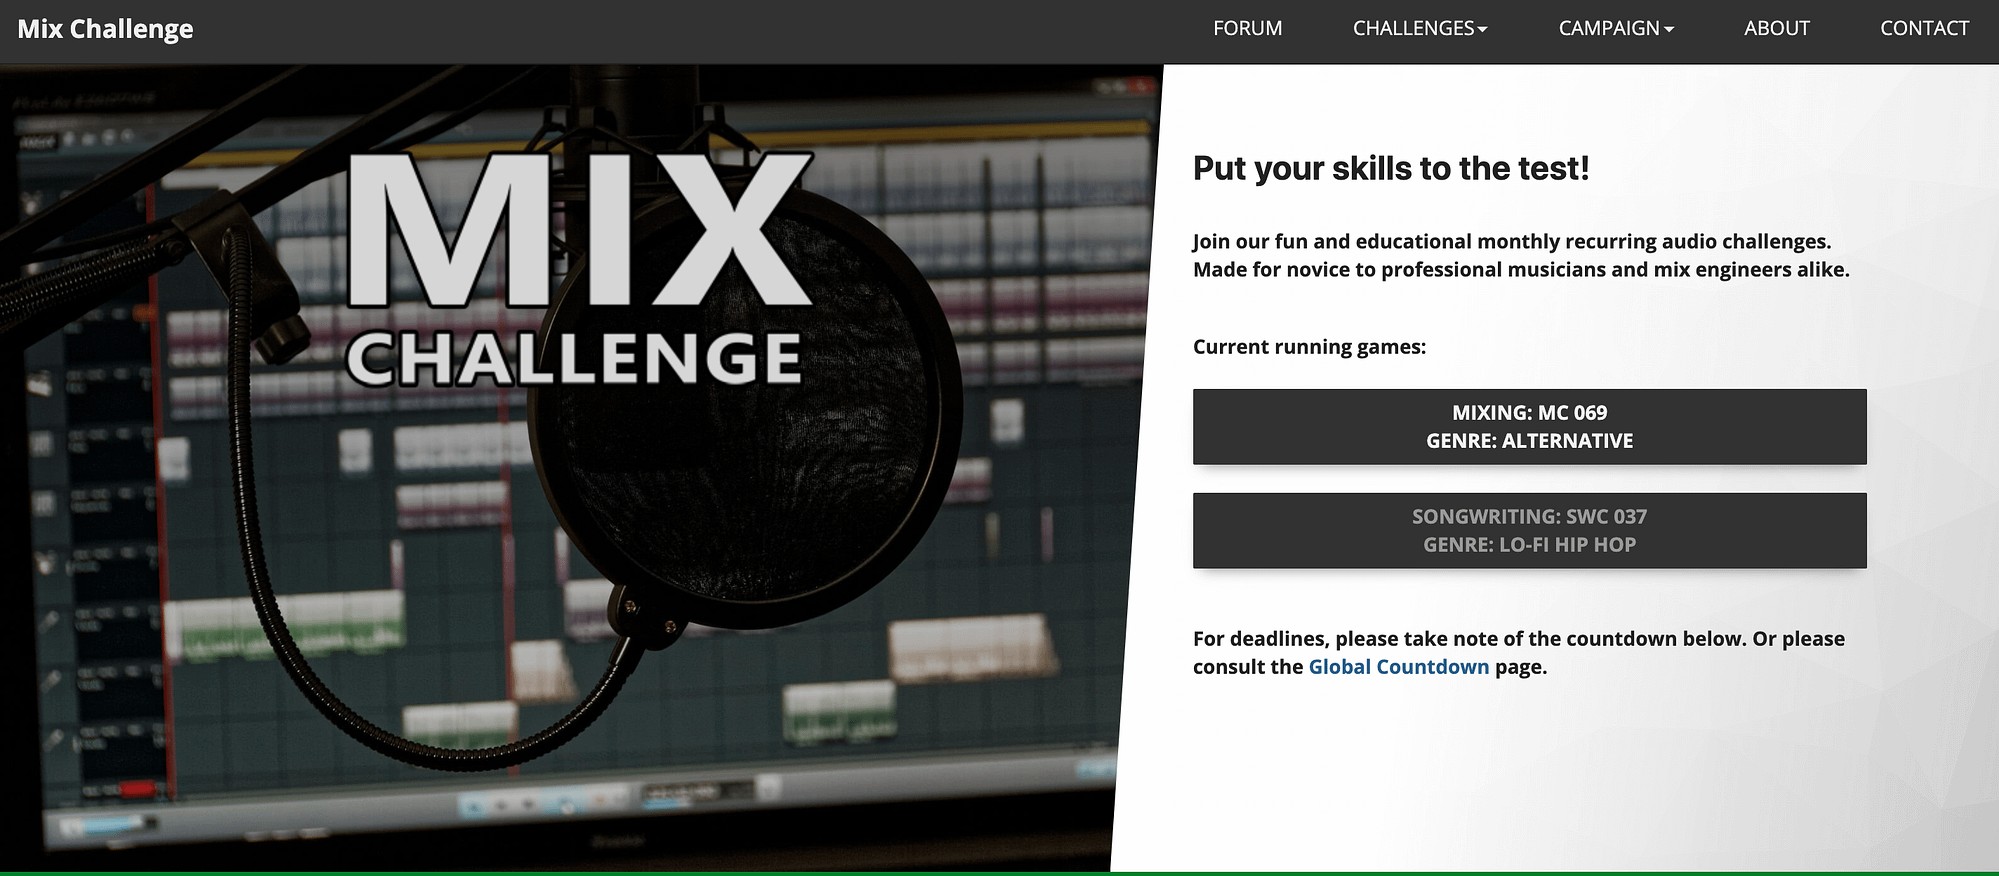 Mix challenge with hit the road music studio